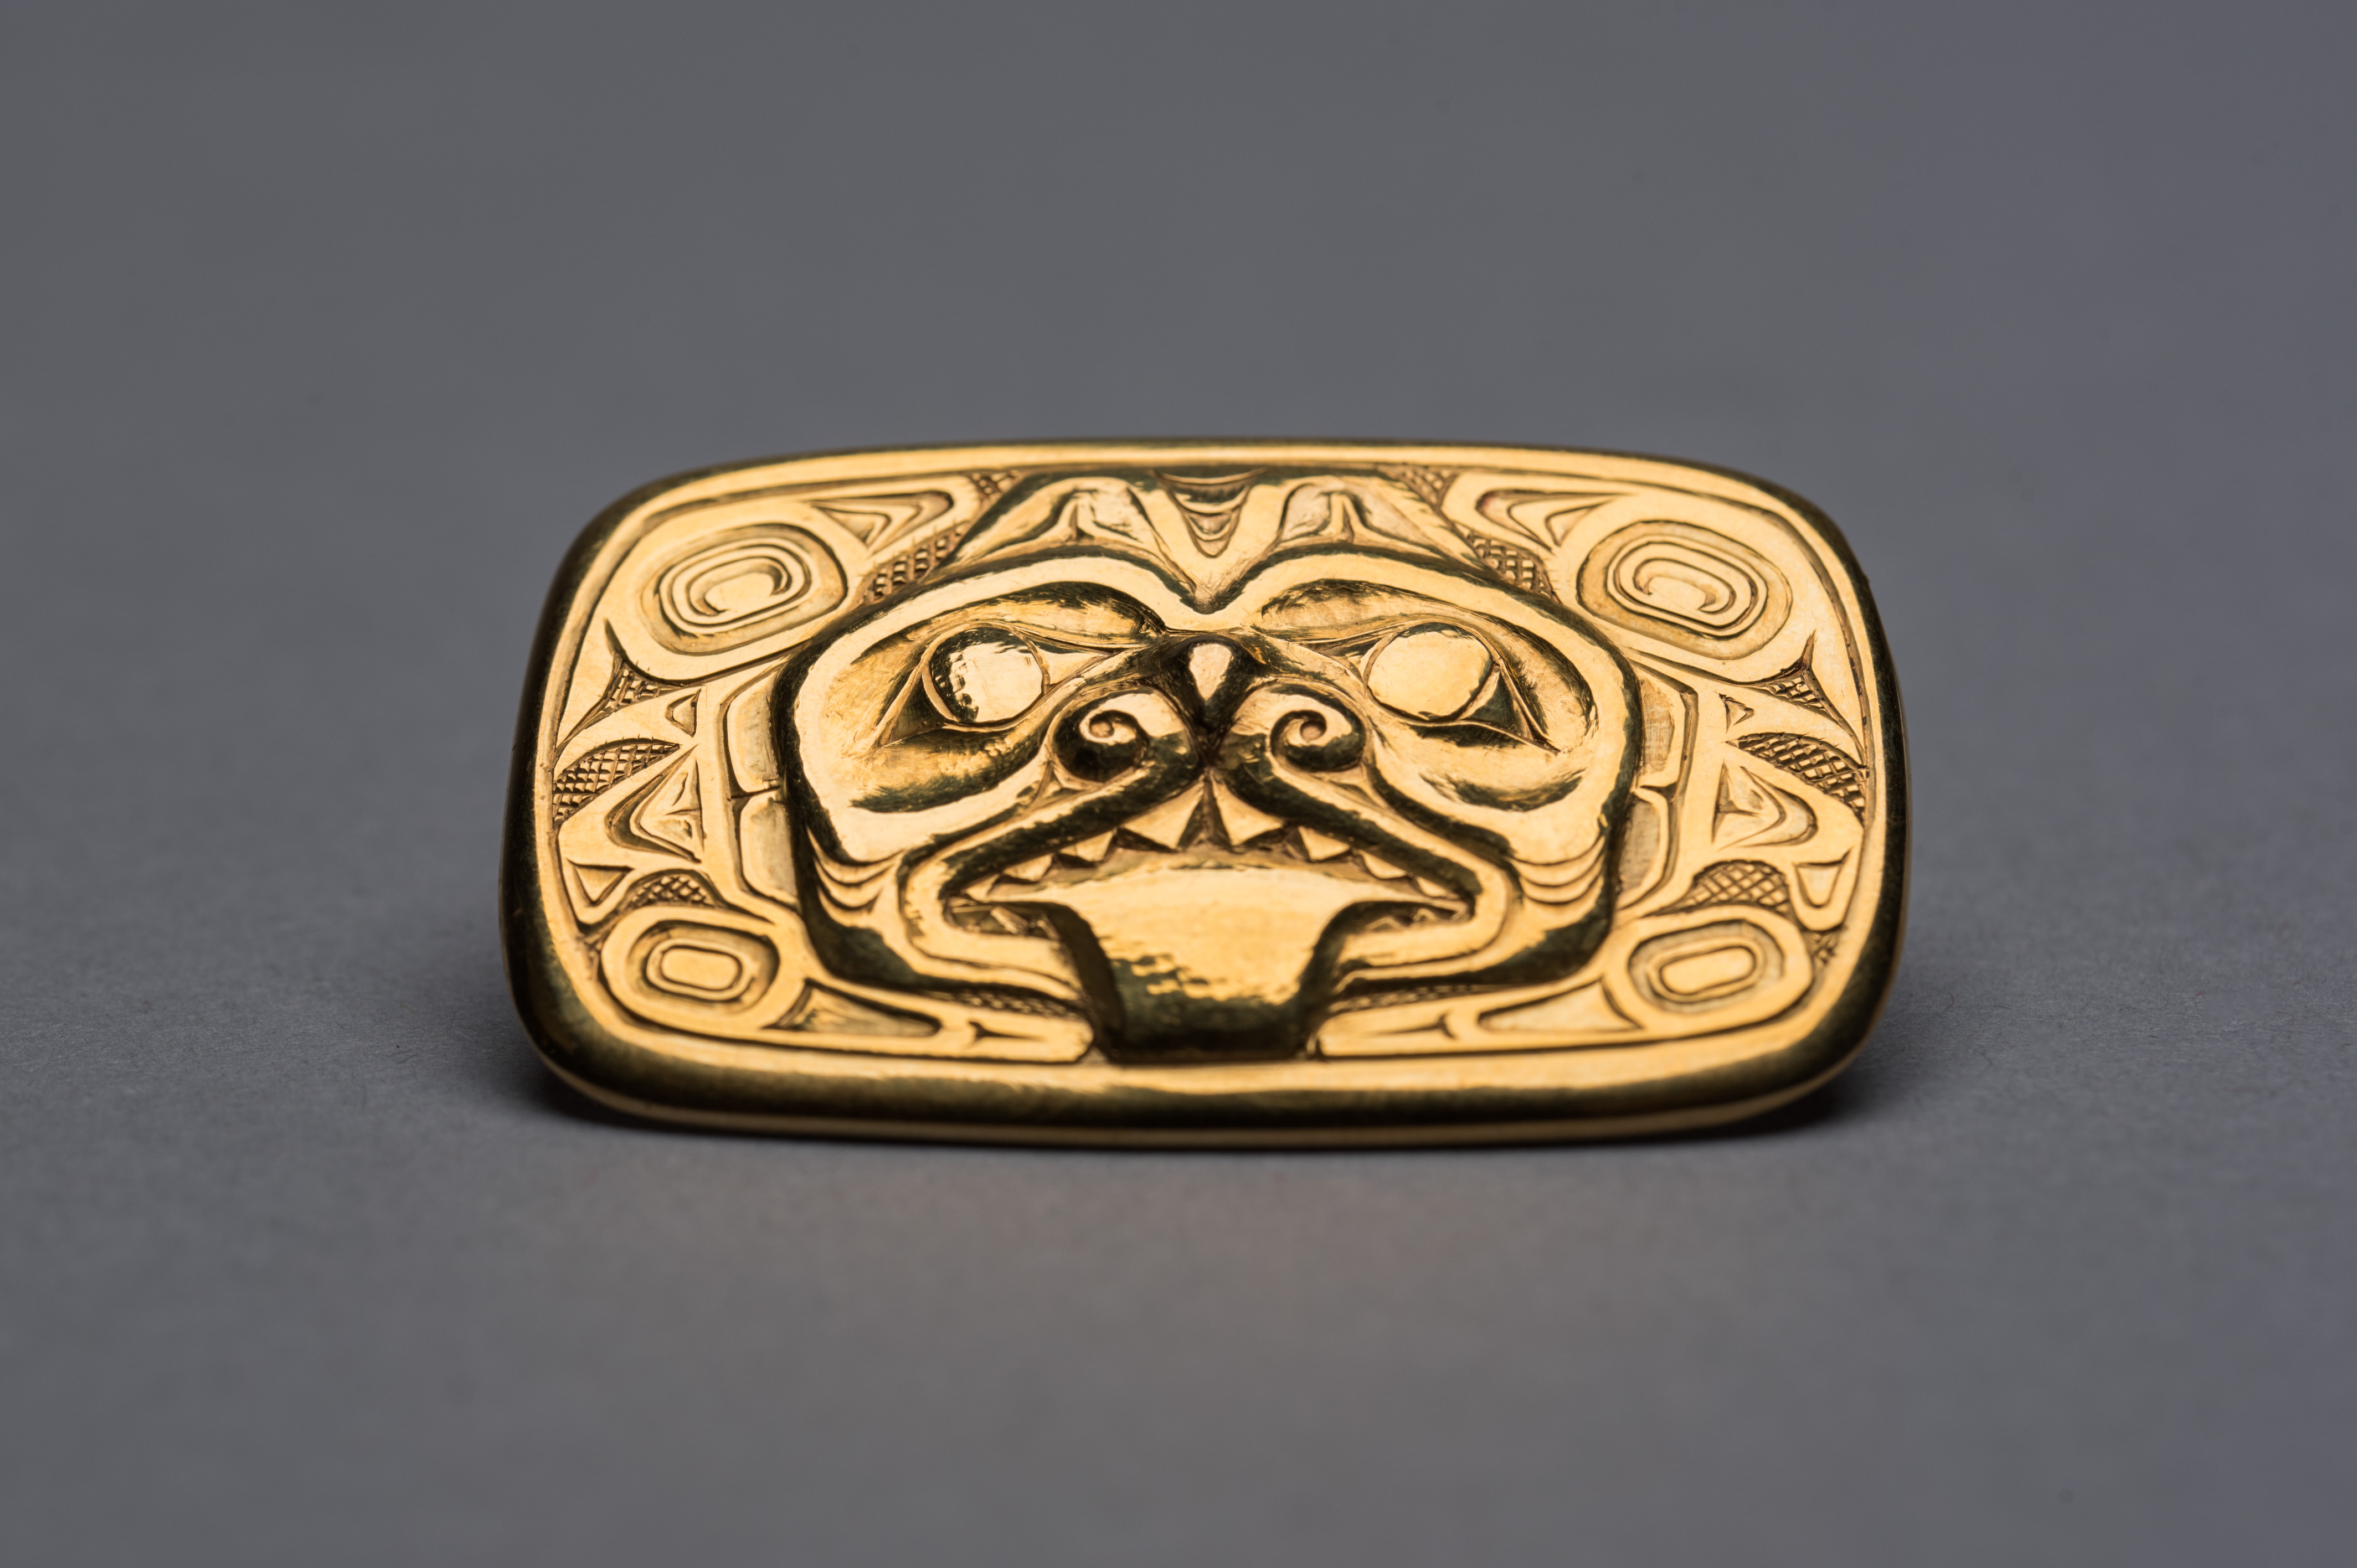 A gold brooch with a dogfish motif, circa 1963, created by renowned Haida artist Bill Reid is part of a collection donated to the Museum of Anthropology by late Calgary philanthropist Margaret (Marmie) Perkins Hess. Credit: Martin Dee/University of British Columbia